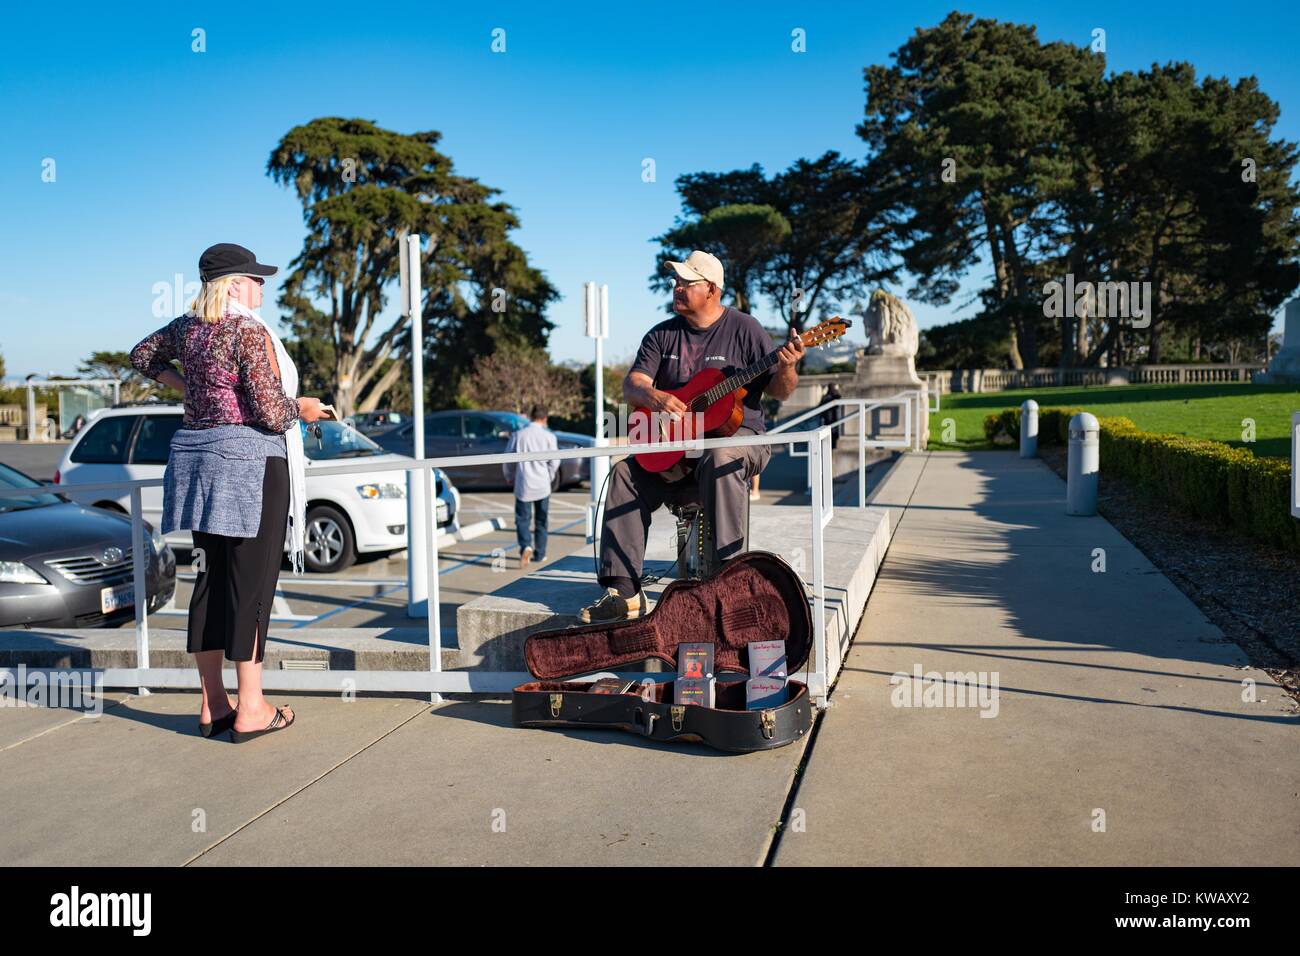 A woman pauses and speaks with a man who plays a guitar while busking in front of the California Palace of the Legion of Honor in the Lands End neighborhood of San Francisco, California, October 8, 2016. Stock Photo